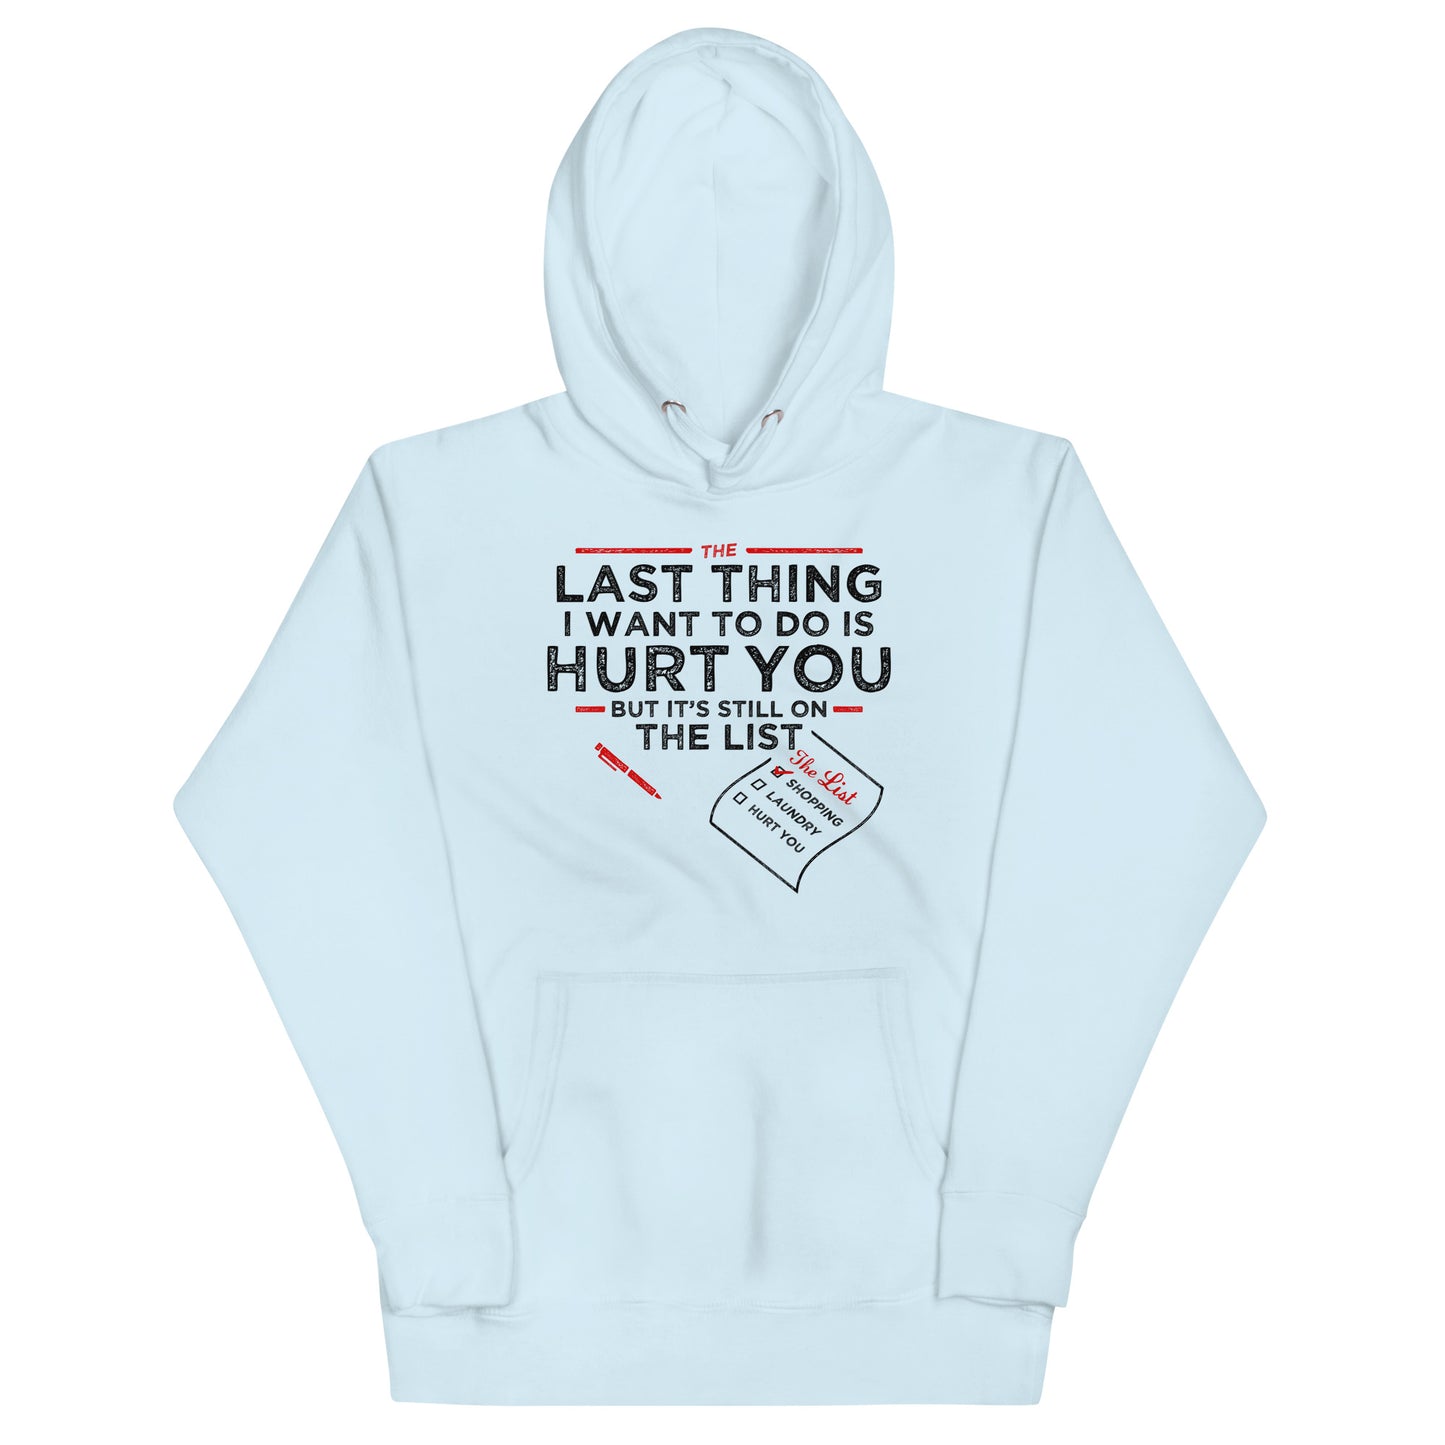 The Last Thing I Want To Do Is Hurt You Unisex Hoodie